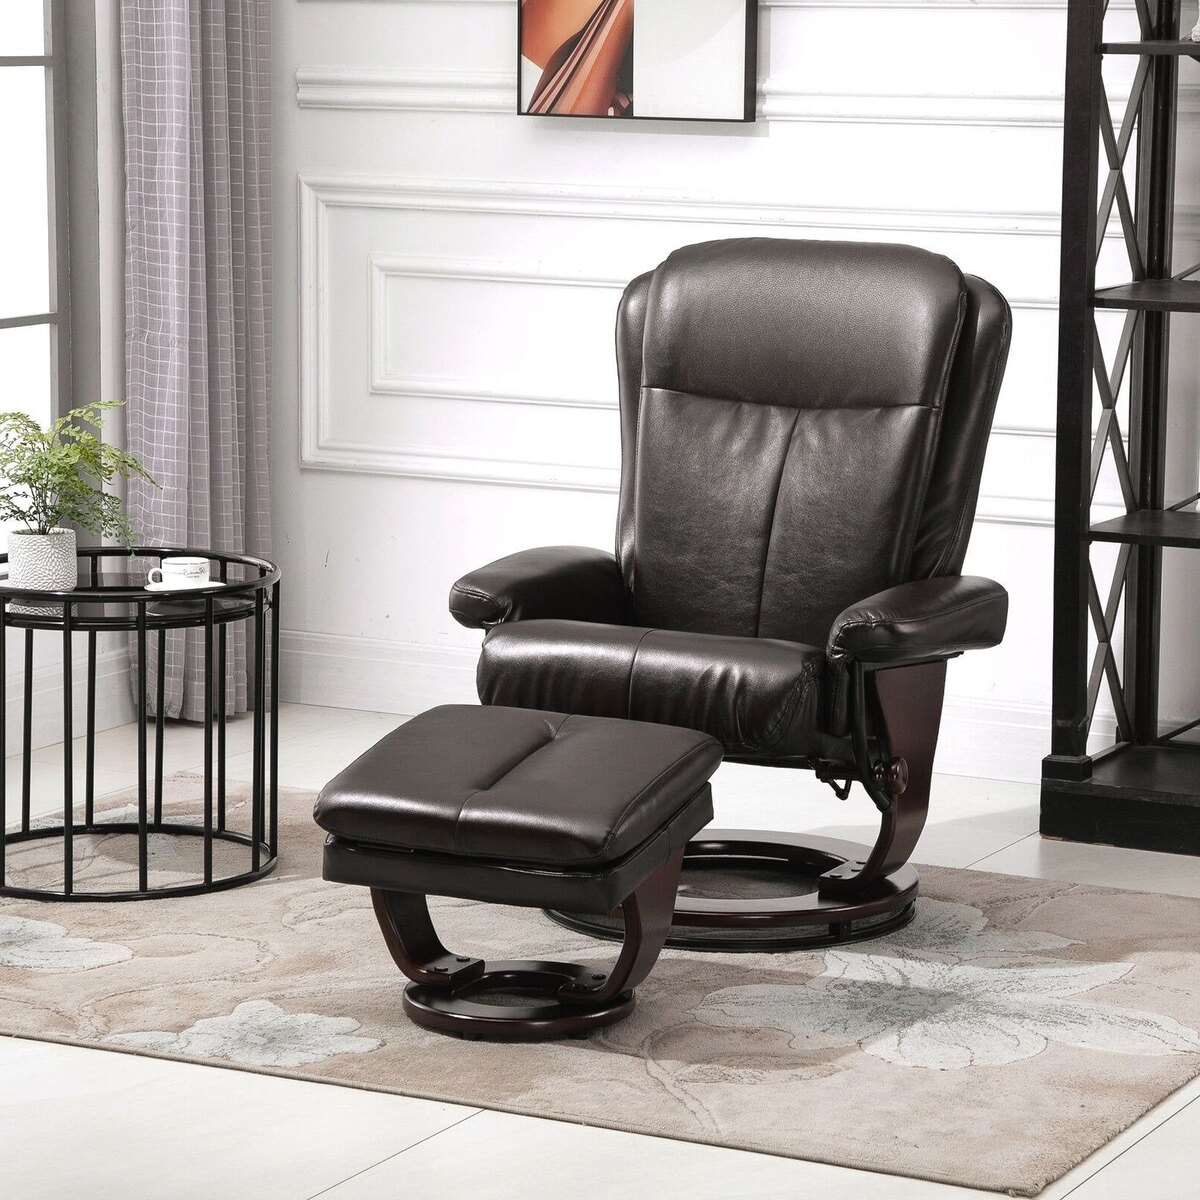 How To Stop A Swivel Recliner From Swiveling